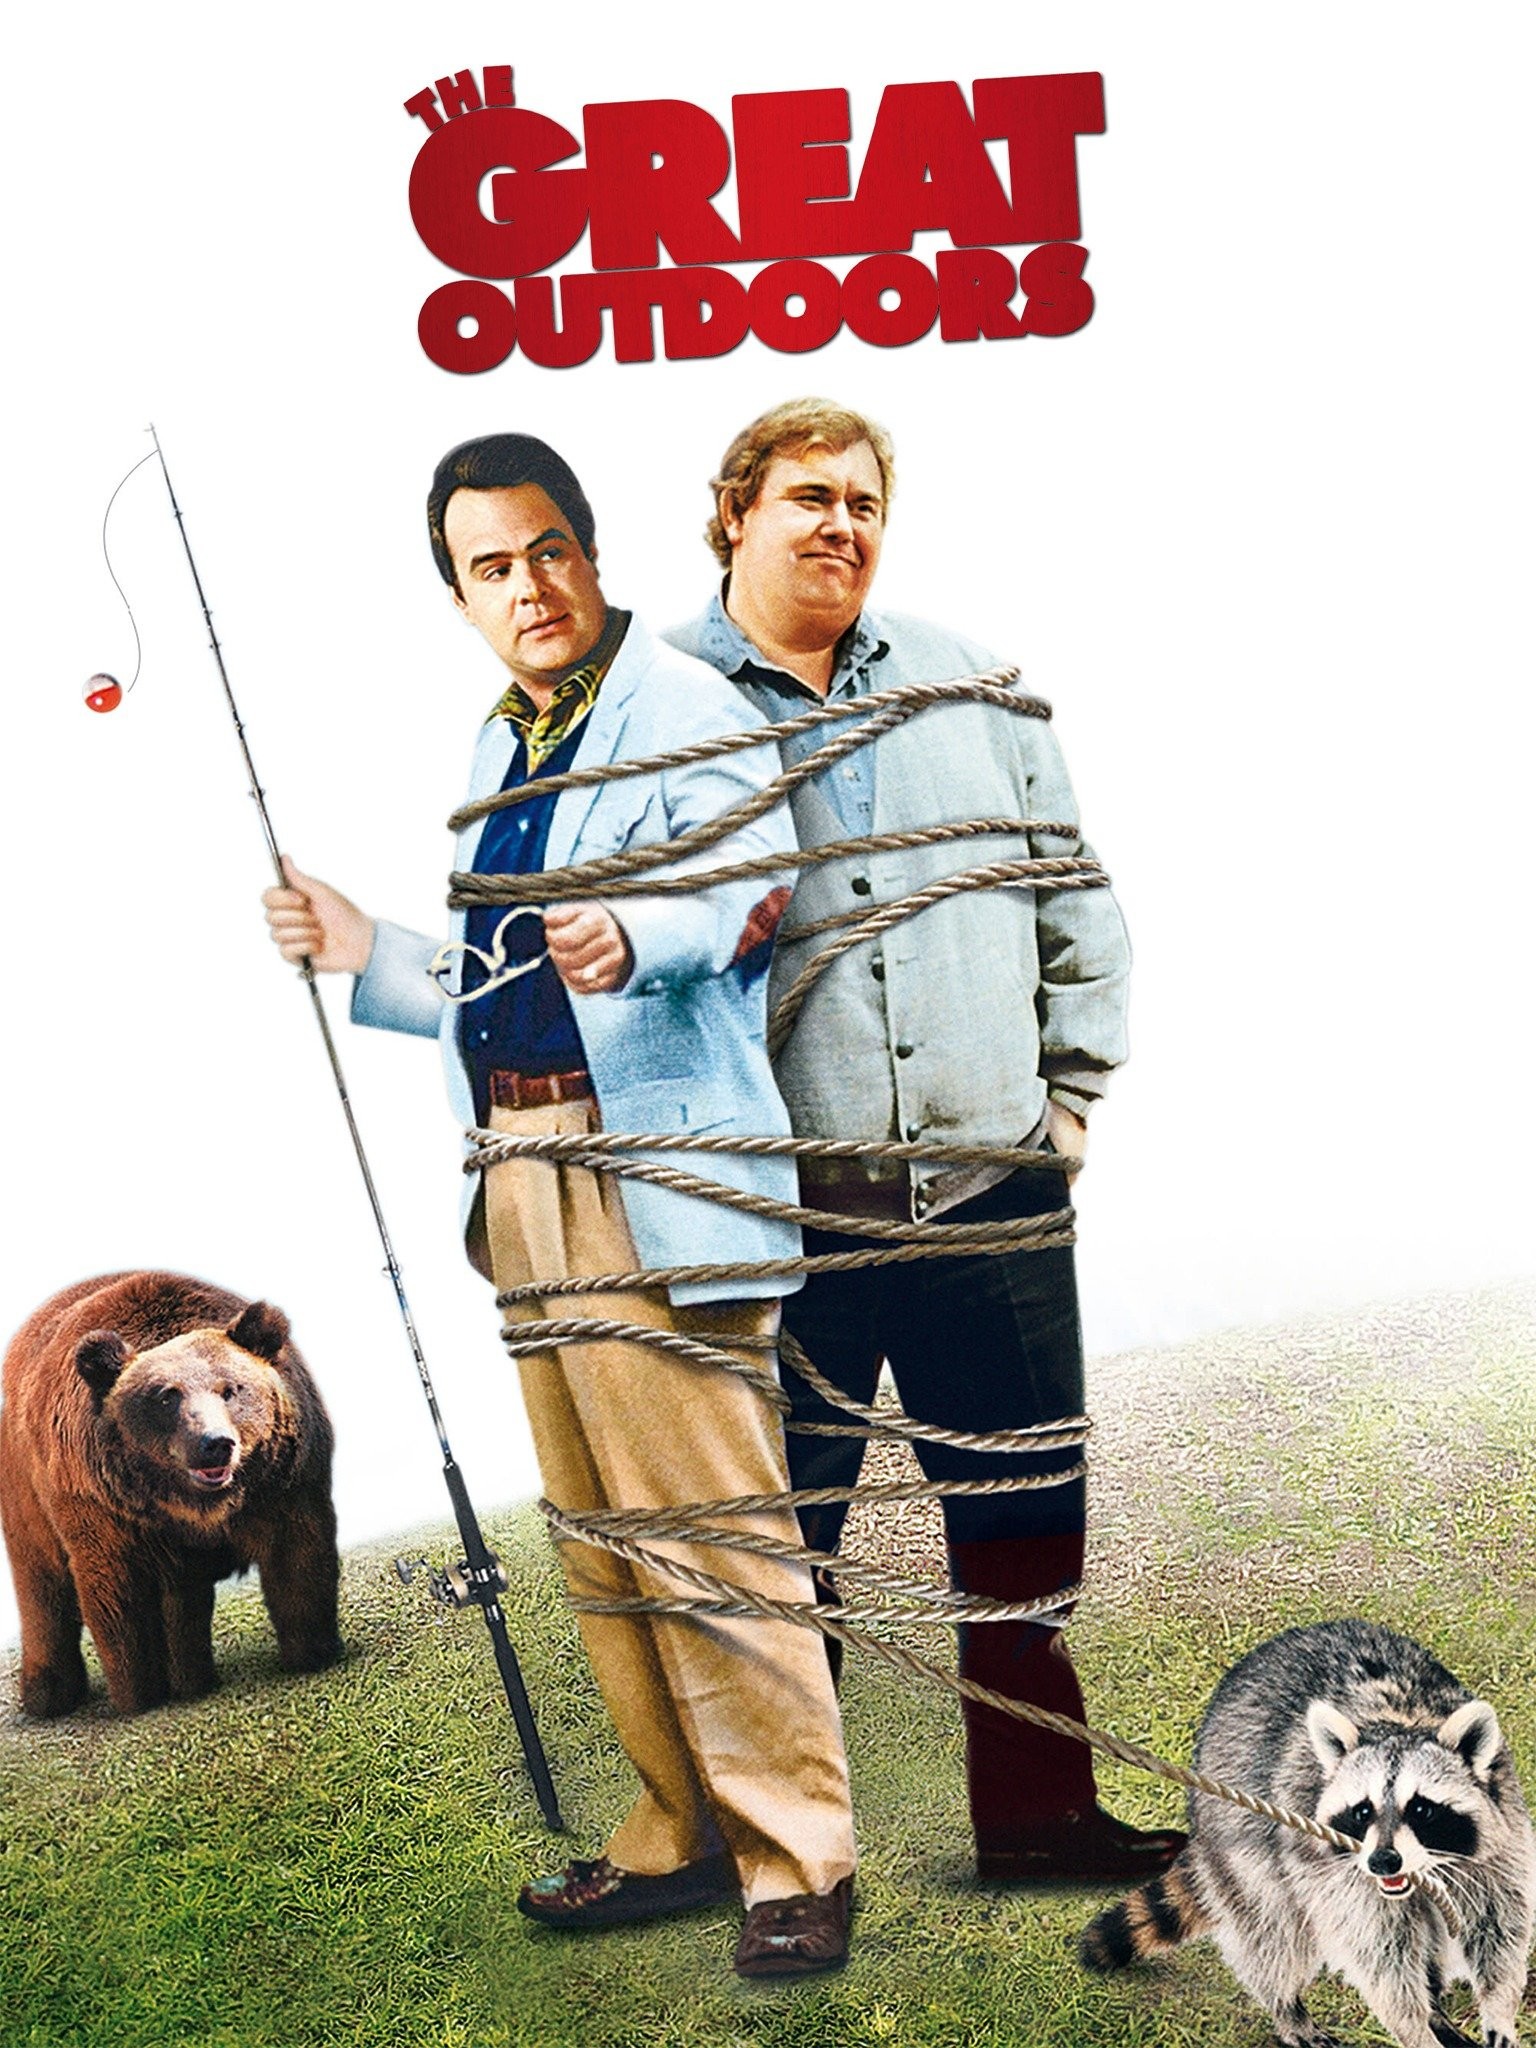 "The Great Outdoors" movie poster 